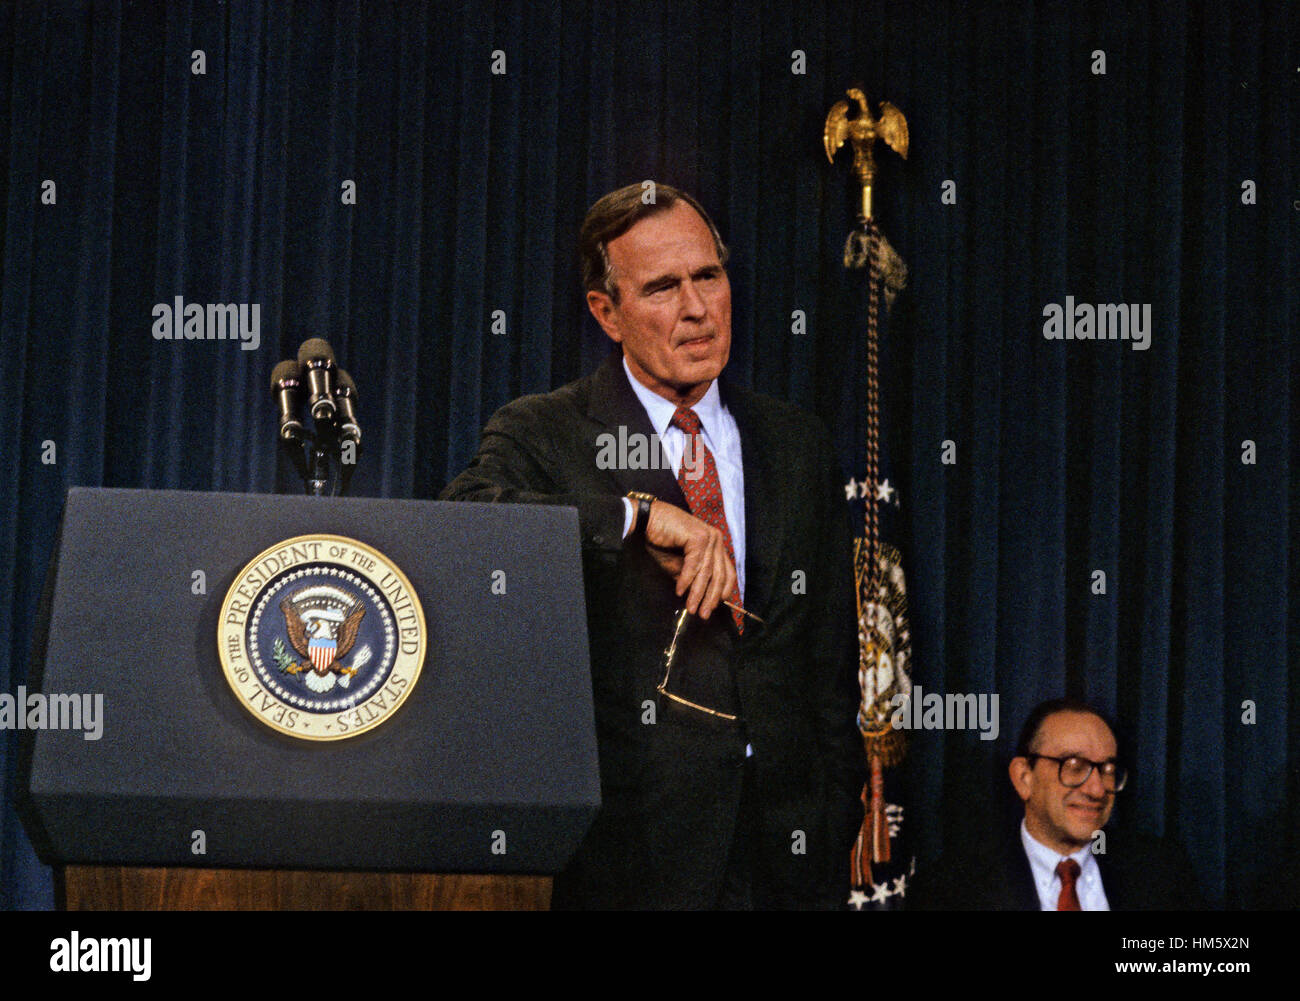 United States President George H.W. Bush announces his savings and loan bailout plan at a press conference at the White House in Washington, D.C. on February 6, 1989. Alan Greenspan, Chairman of the U.S. Federal Reserve looks on from lower right..Credit: Stock Photo